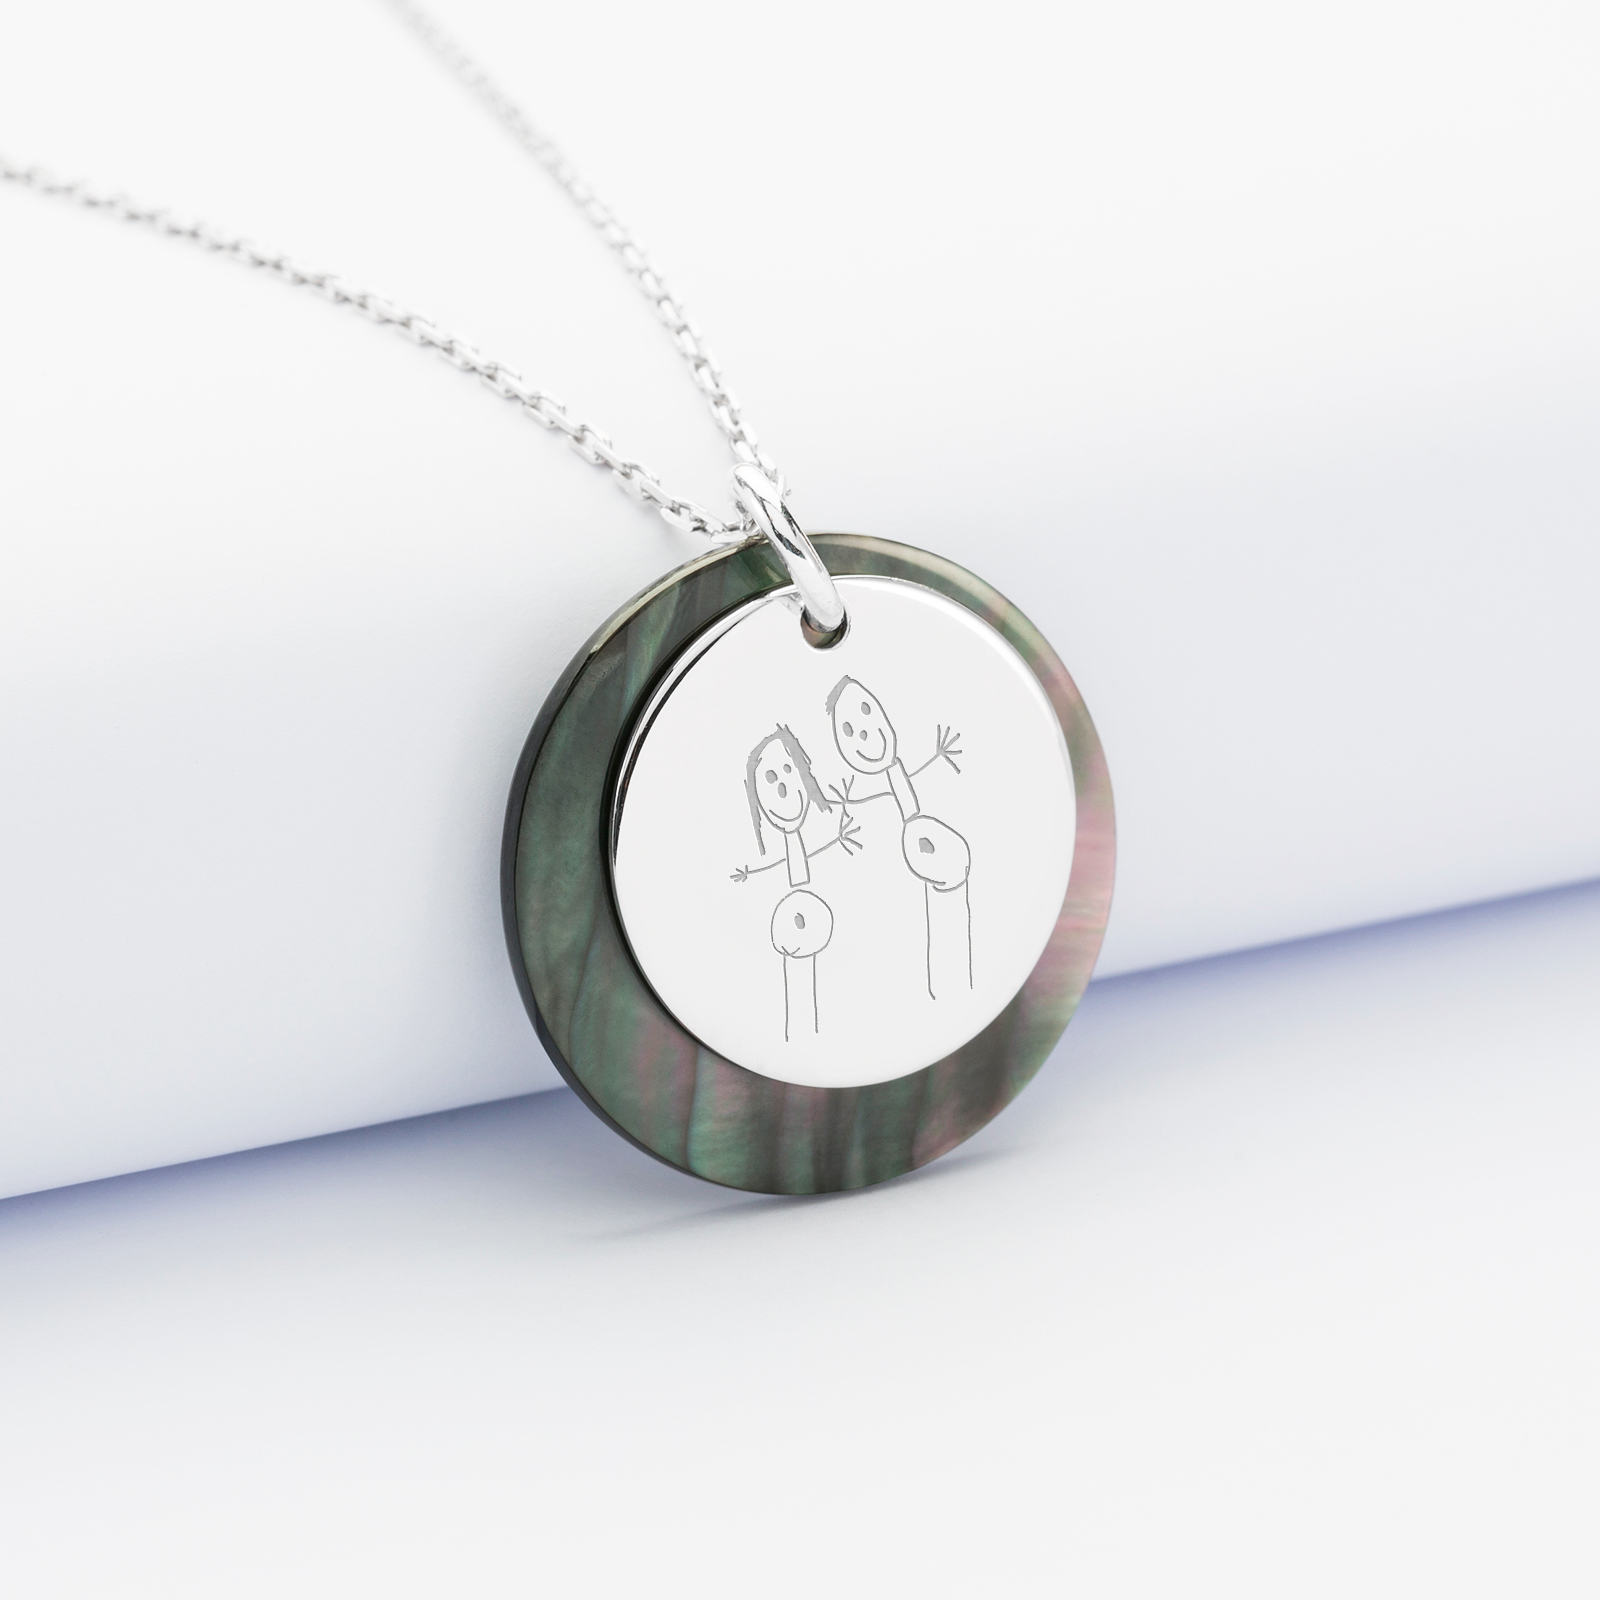 Personalised mother of pearl 25 mm pendant charm and engraved silver medallion 19 mm - sketch